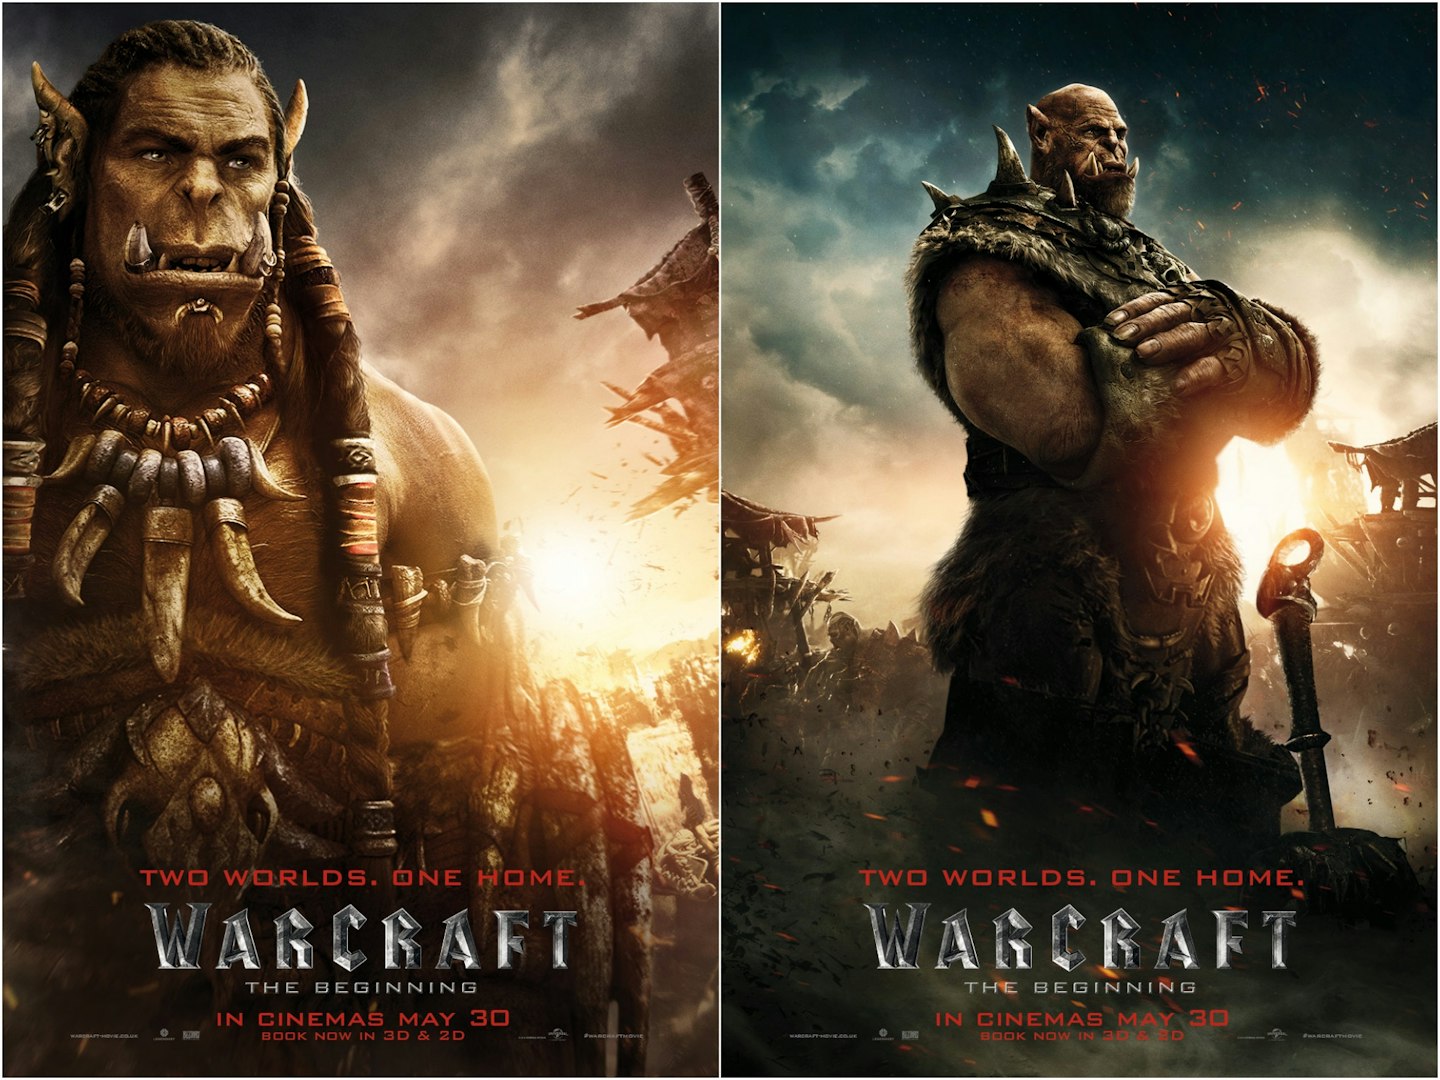 Warcraft: The Beginning character posters